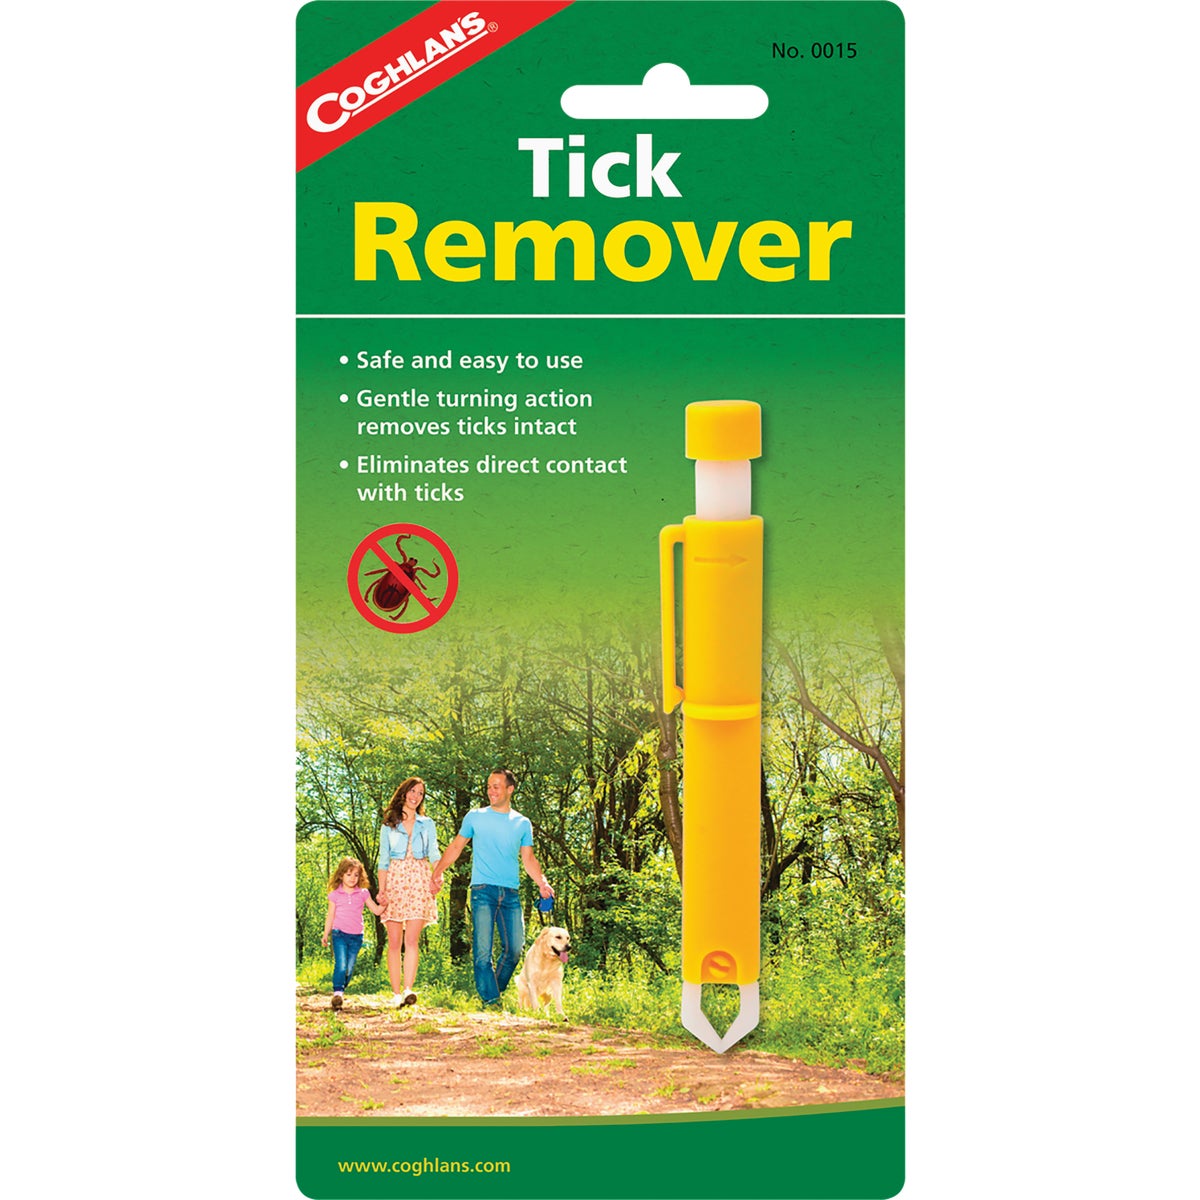 Item 800263, Durable and easy to use tick remover.